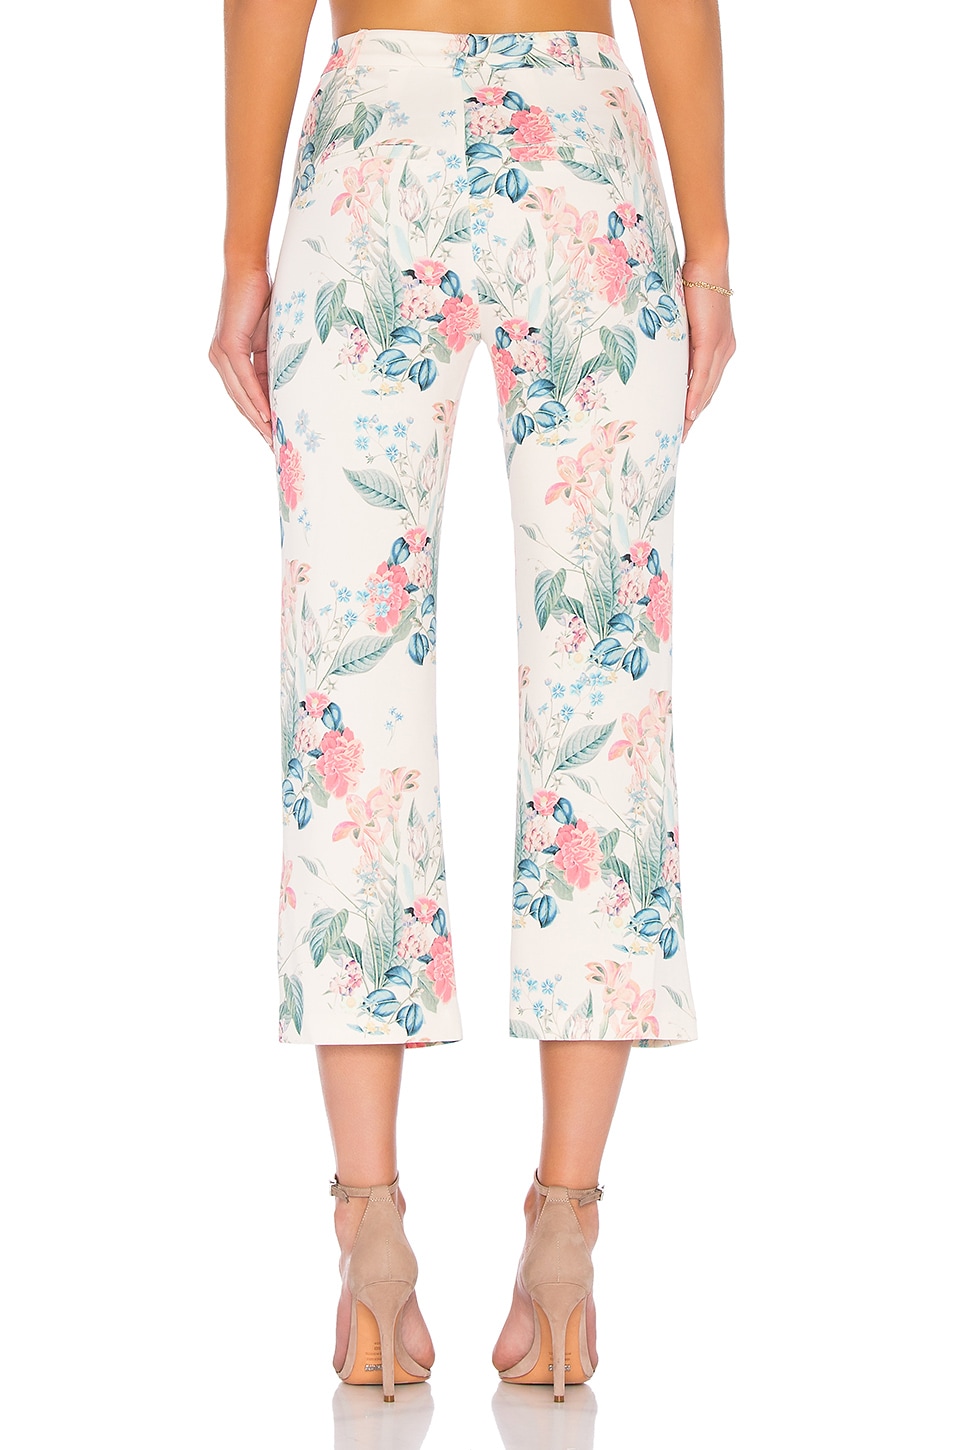 Parker Hugo Pant in Mellow Meadow | REVOLVE